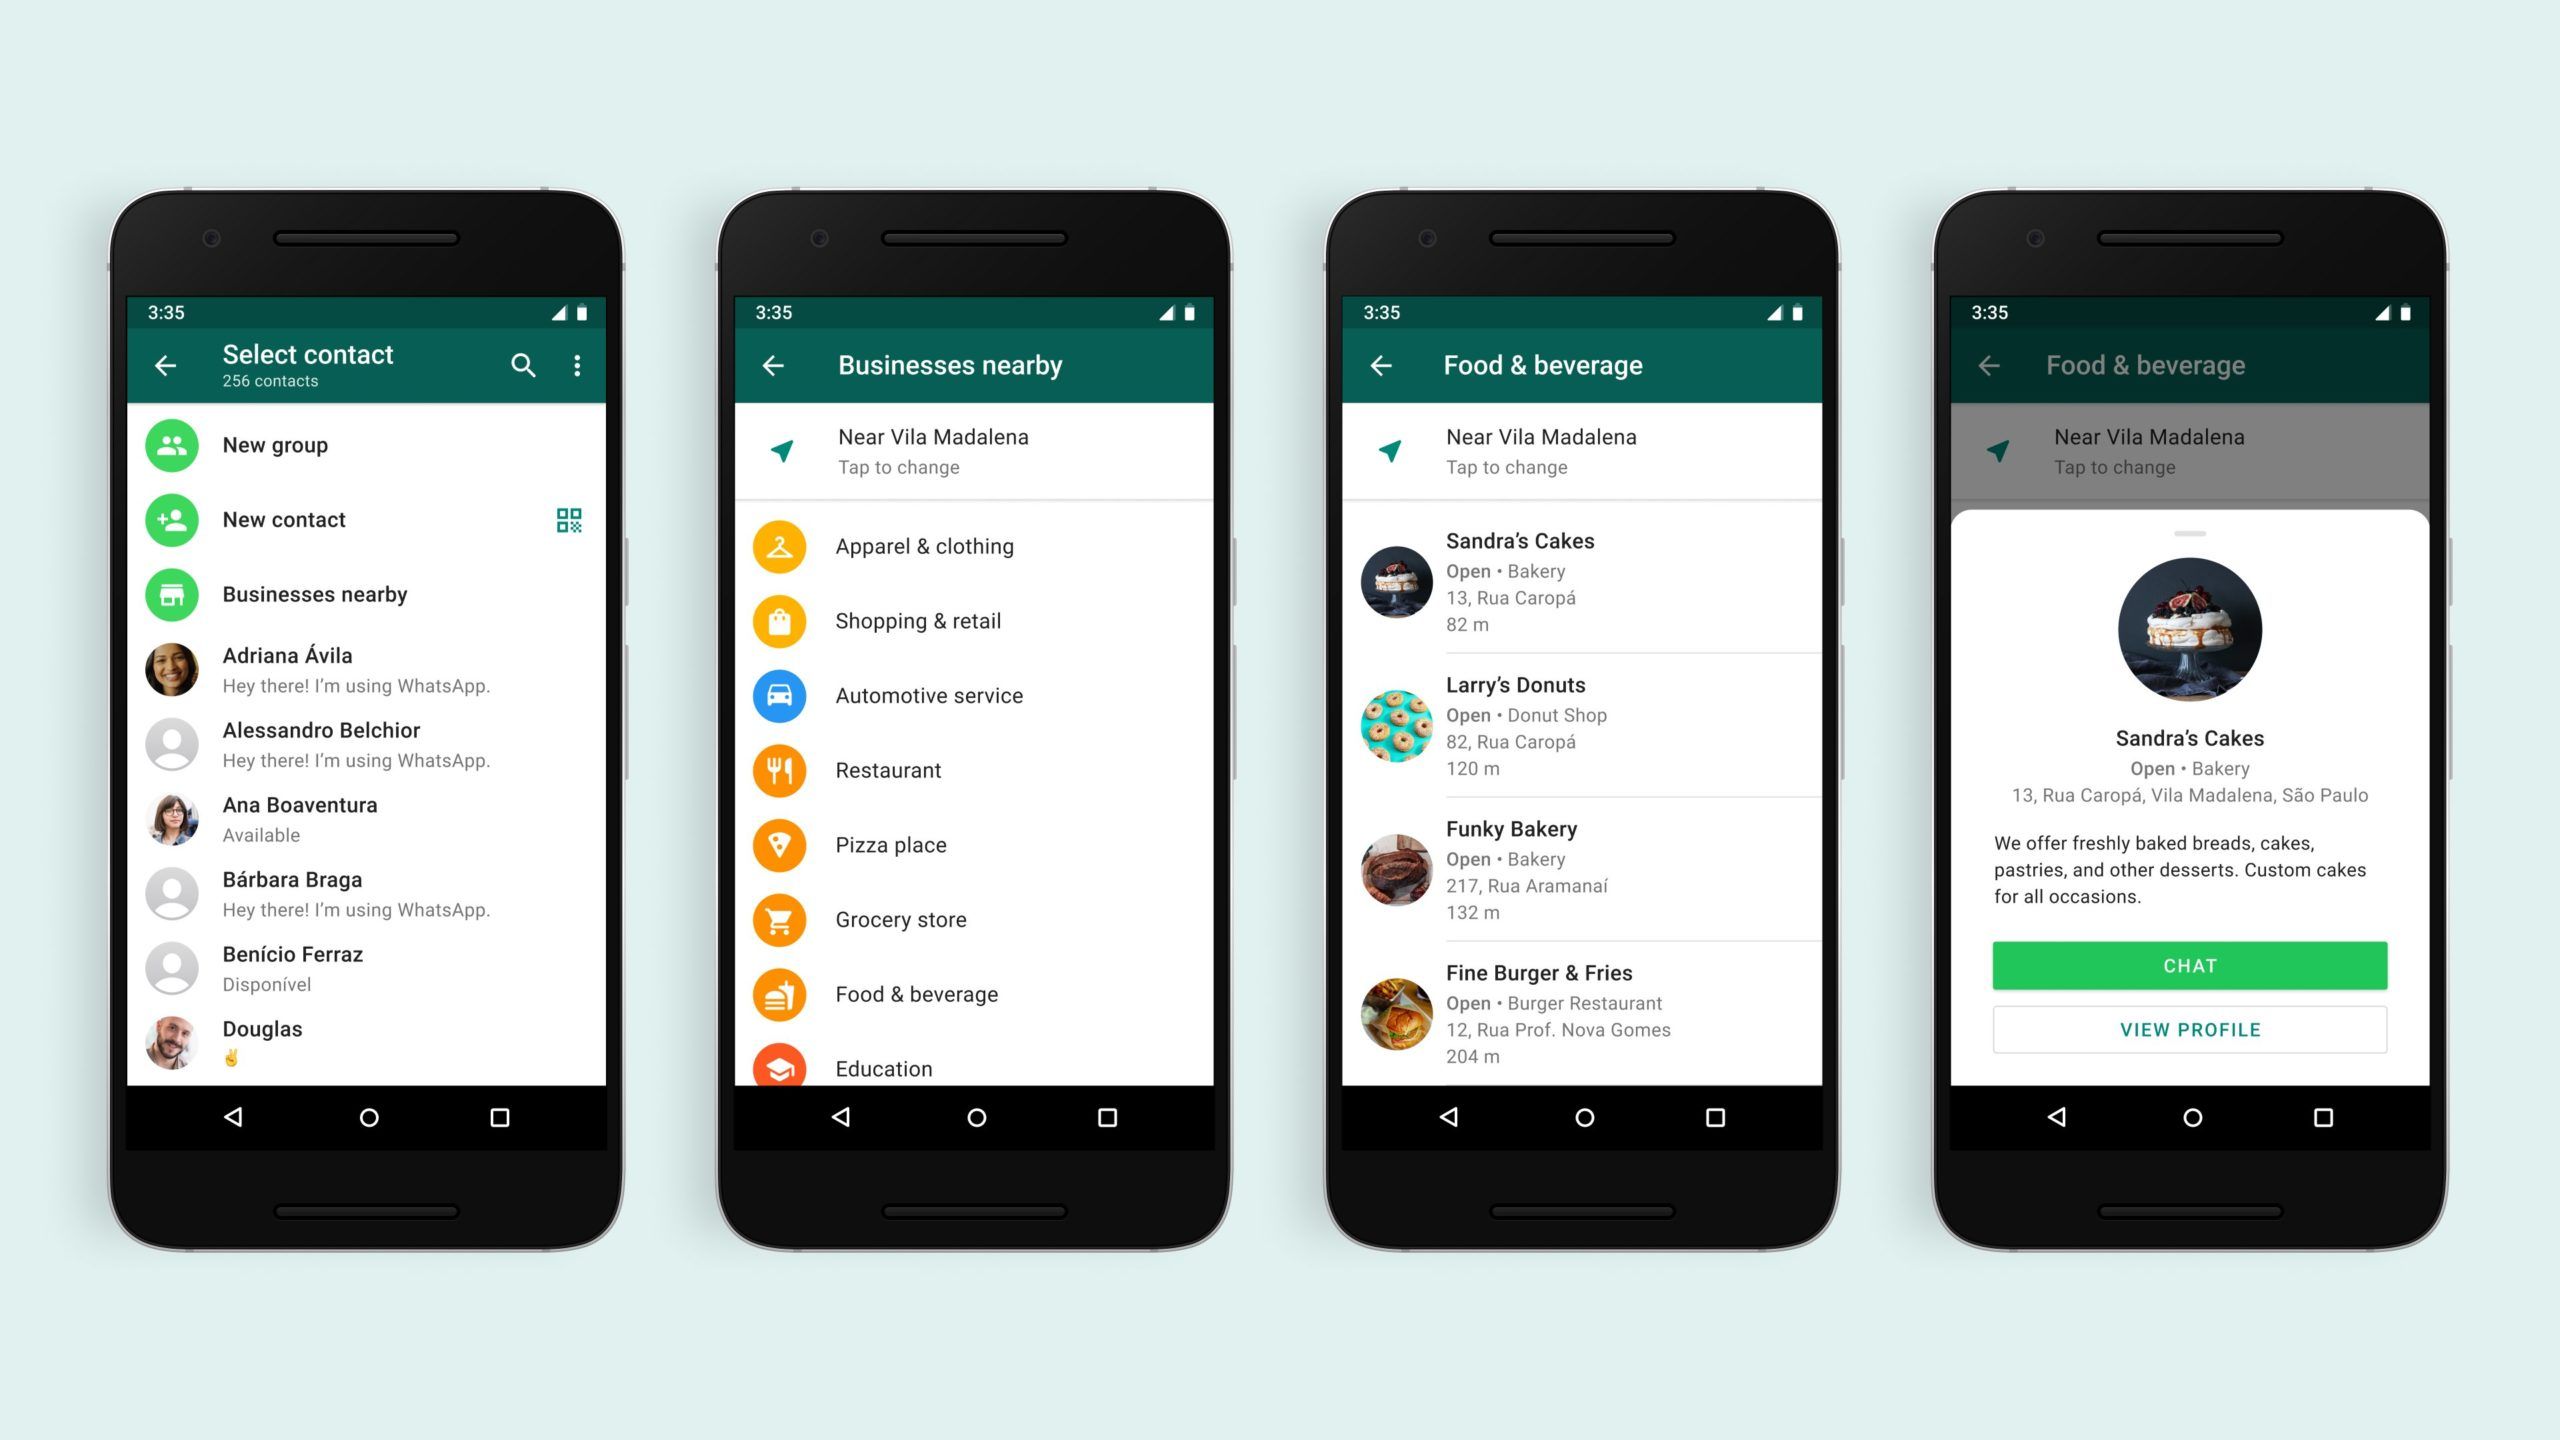 WhatsApp wants to be your new Yellow Pages with its latest update